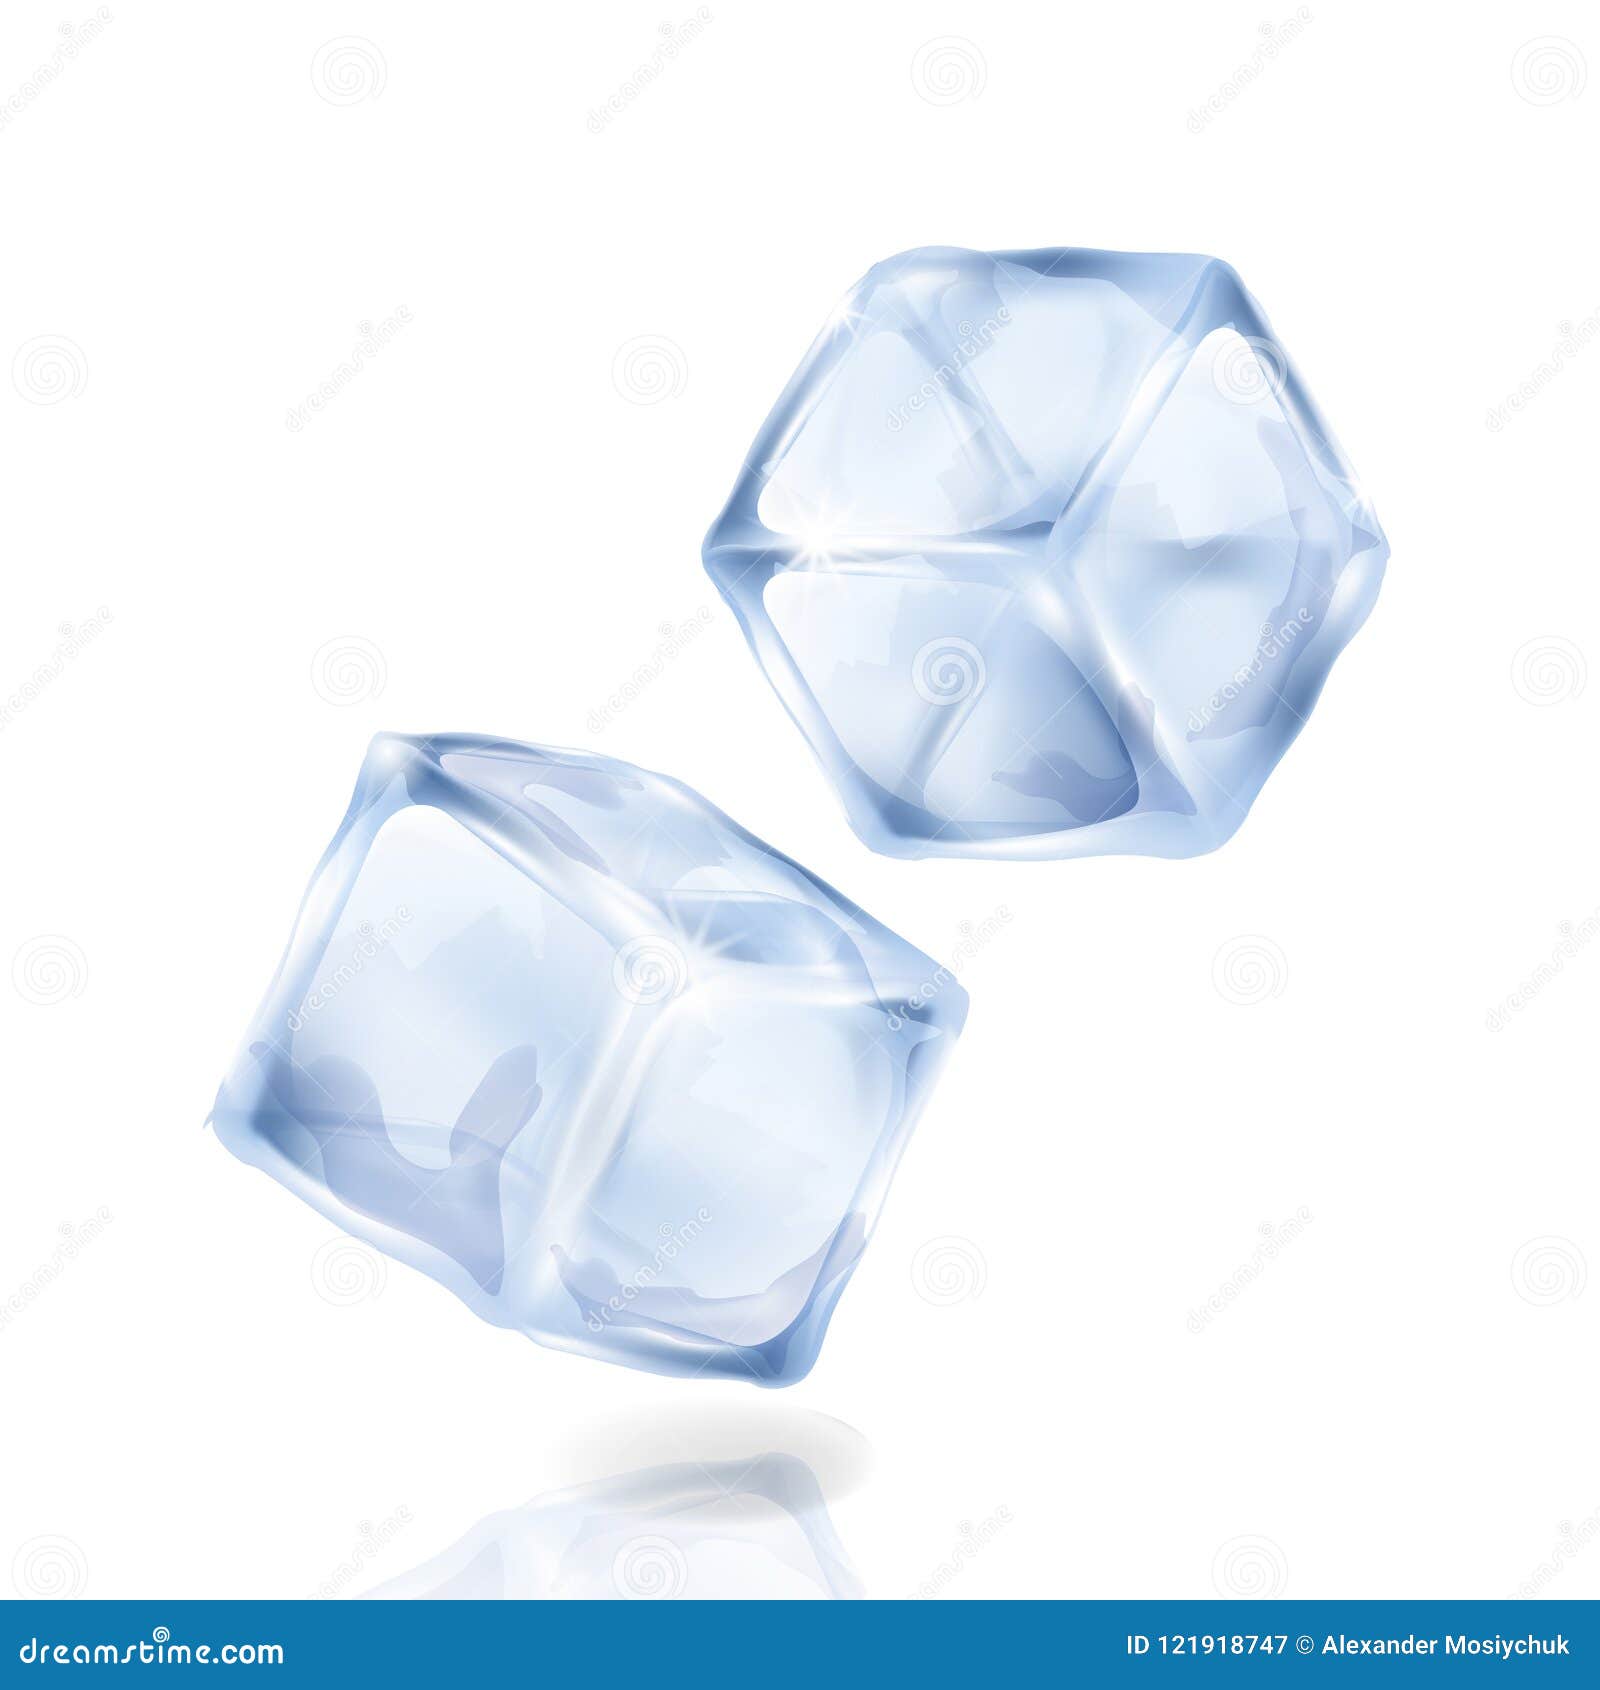 Modestly Priced Premium Premium Vector Two ice cubes in water